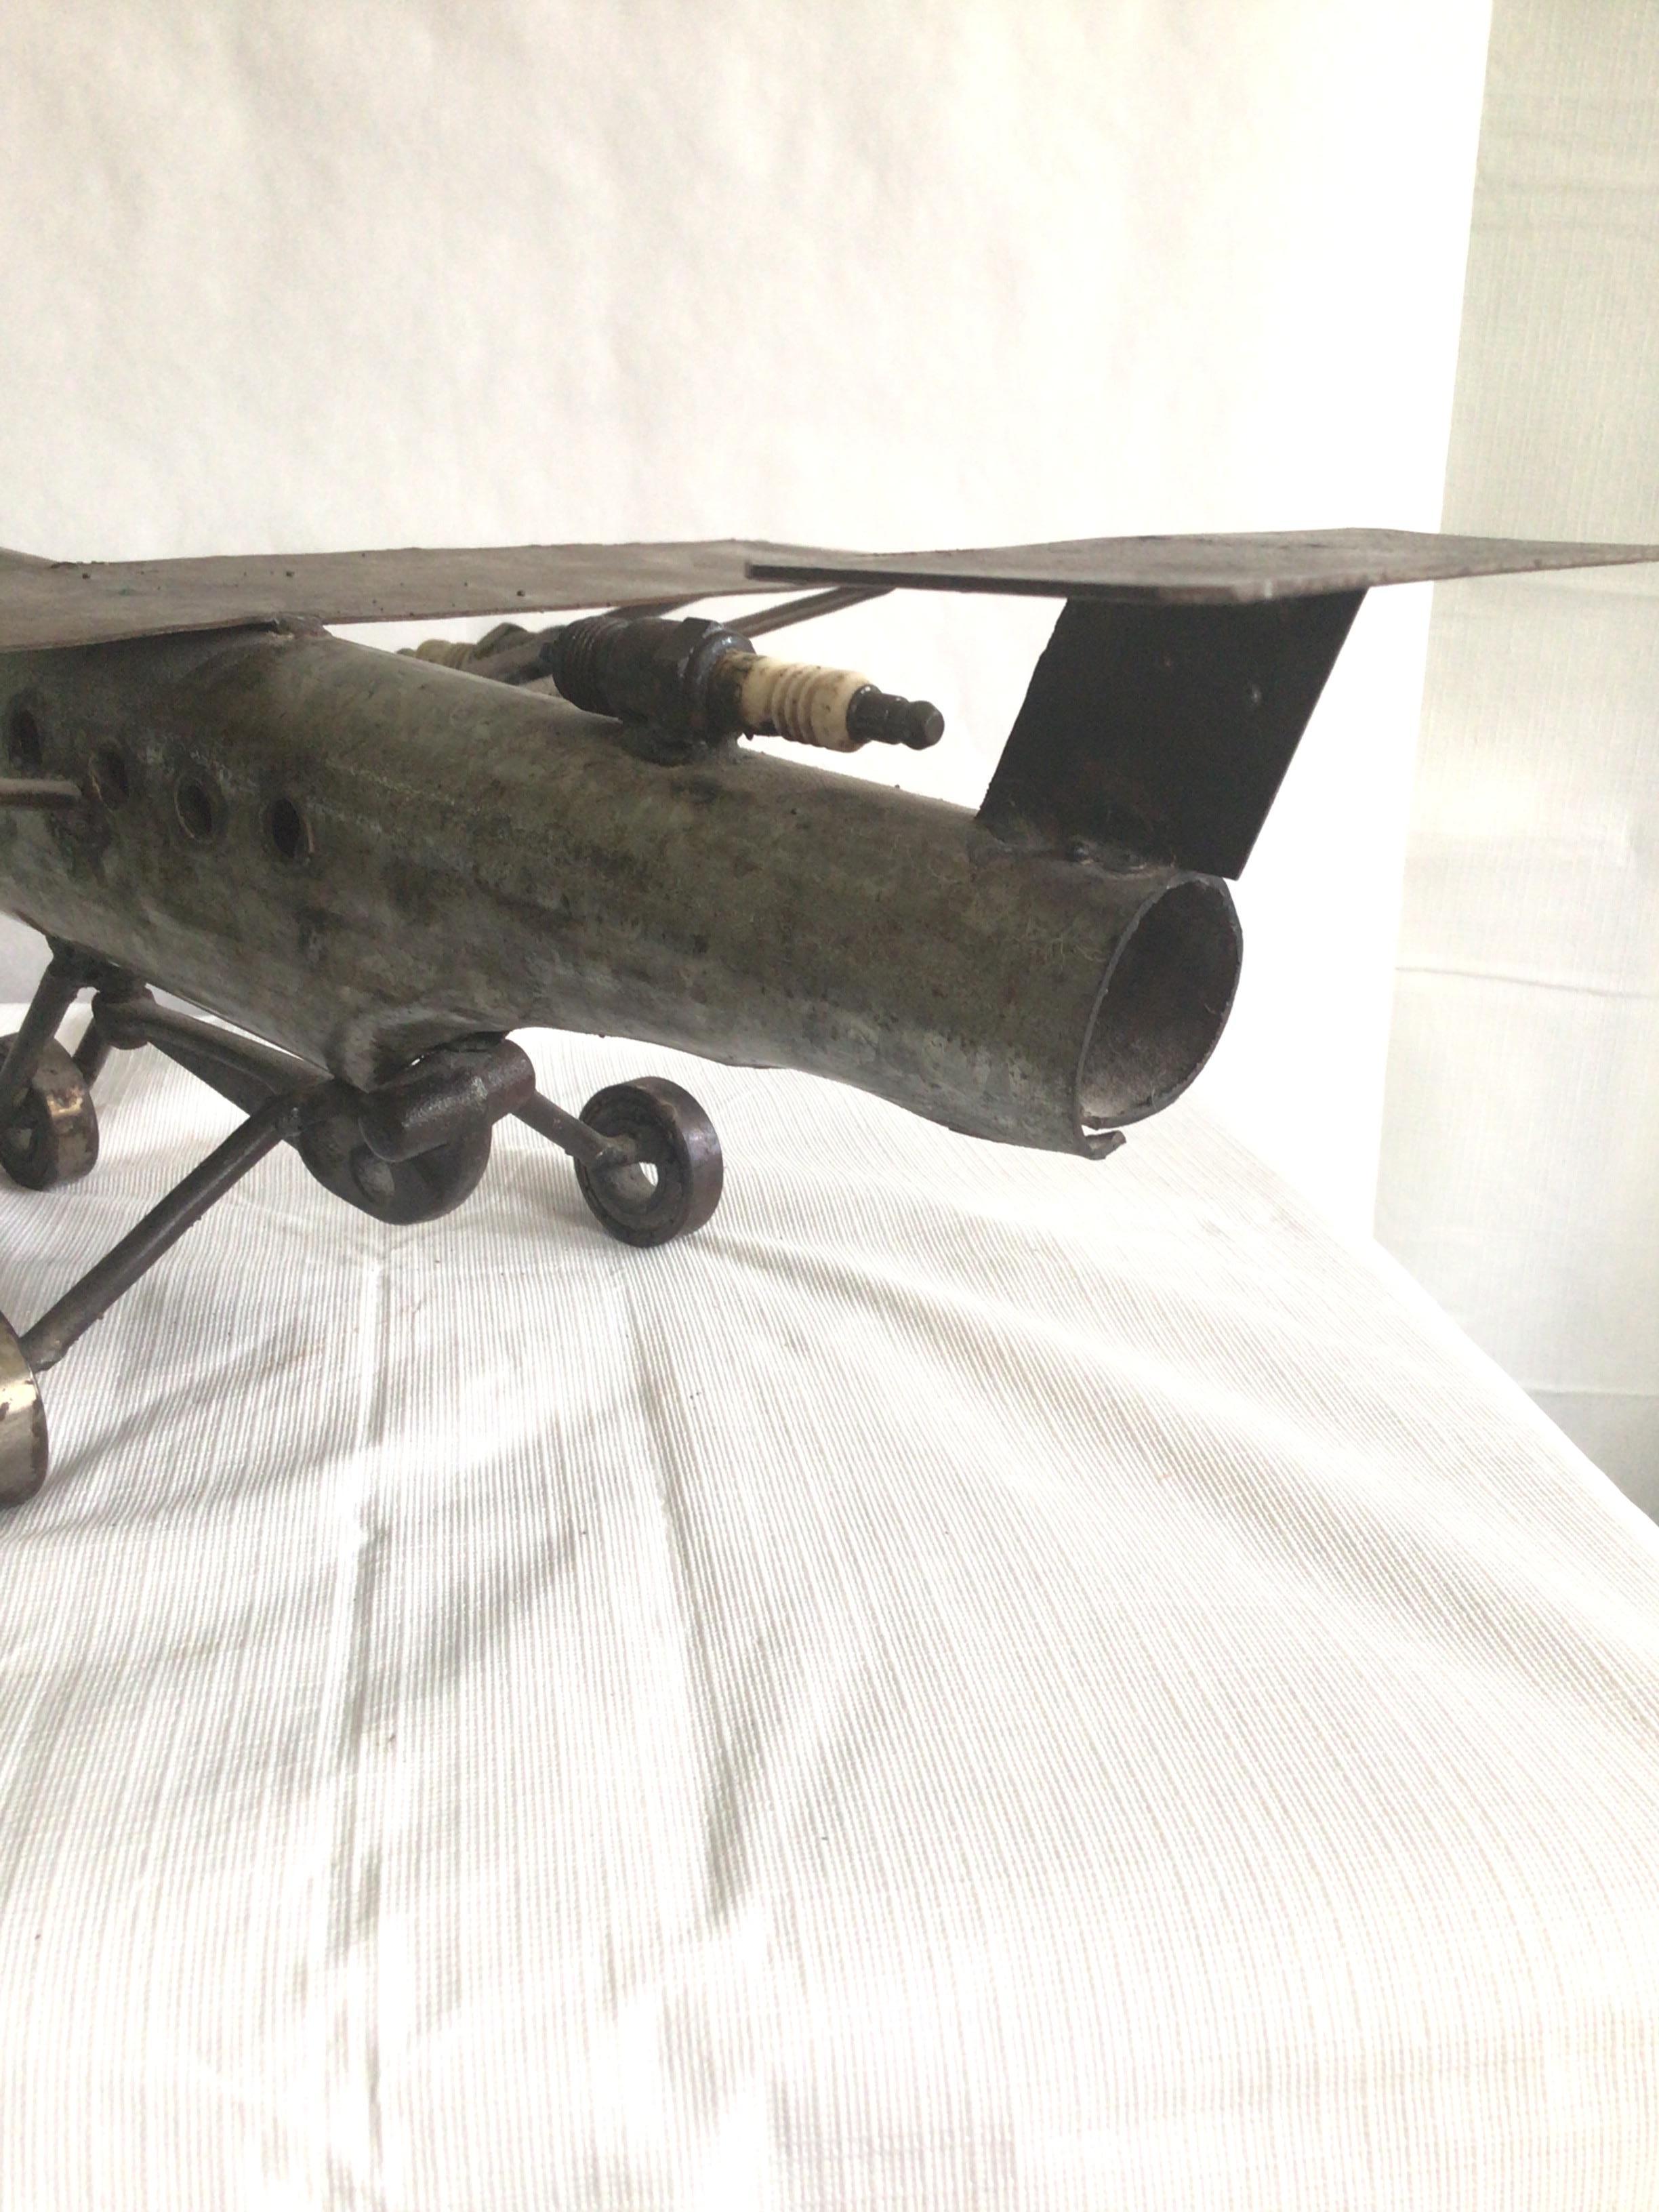 1960s Steel Industrial Airplane Sculpture For Sale 1